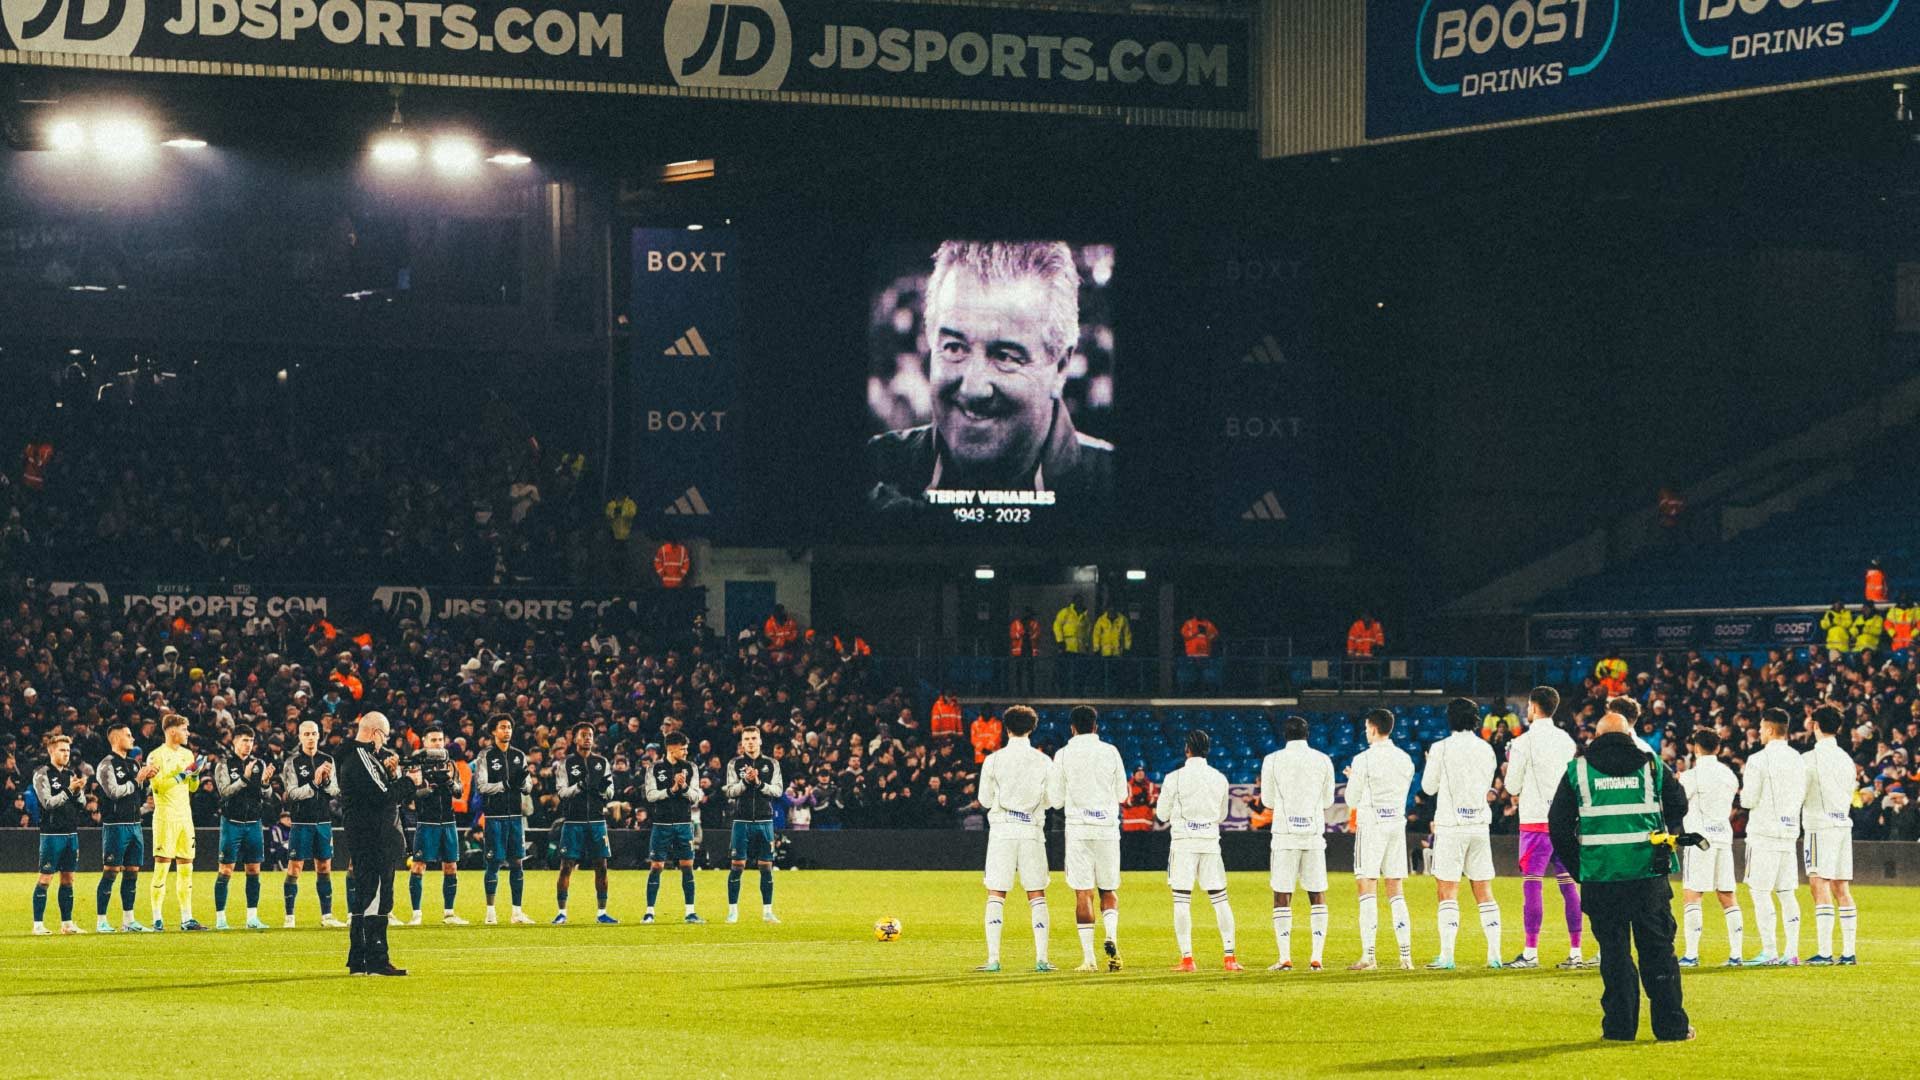 A photo of Leeds lining up for the minute's silence in memory of Terry Venables